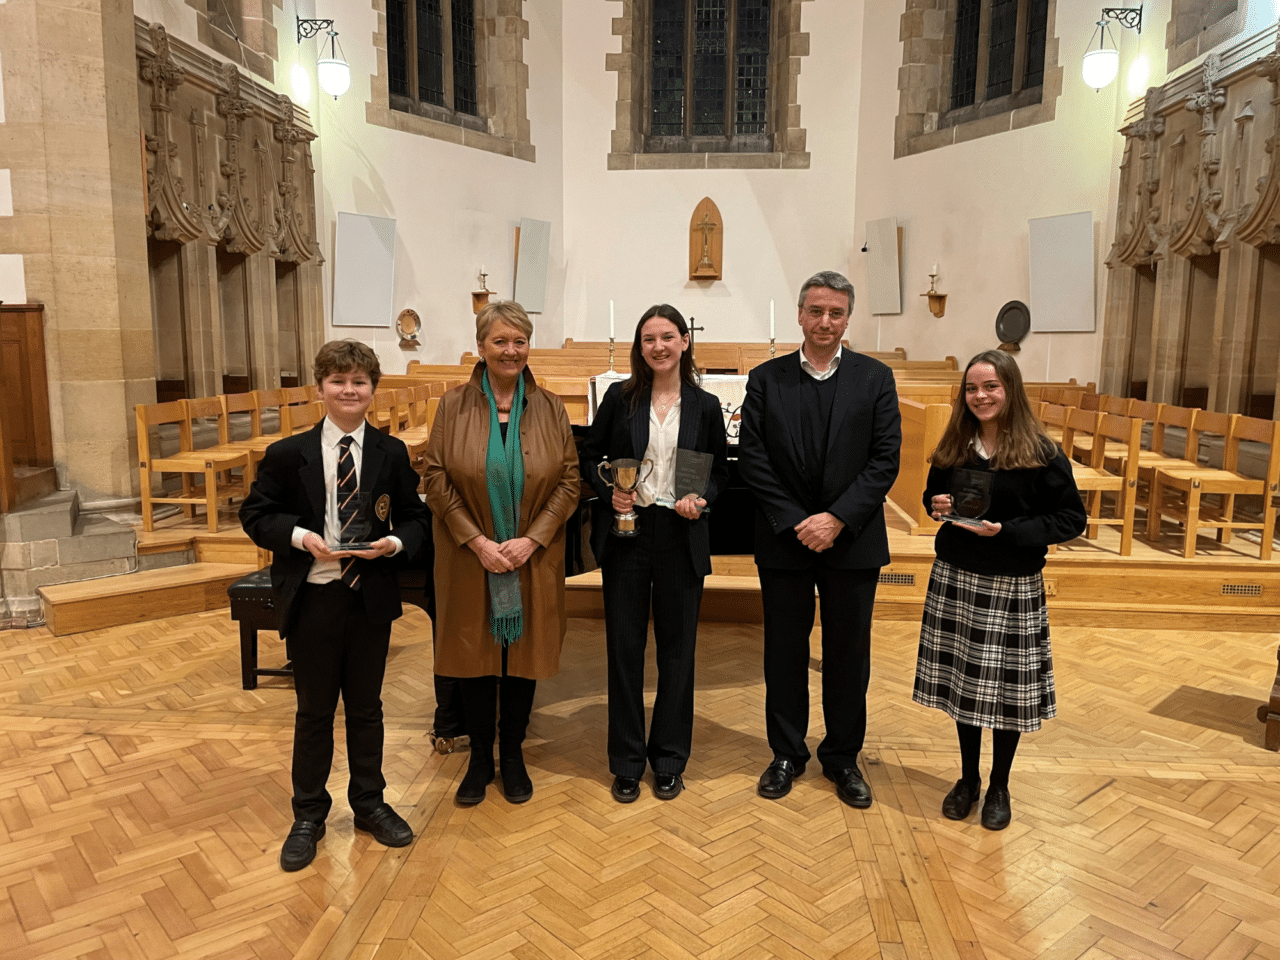 The three winners of the Singing Competition holding their trophies, with the adjudicators